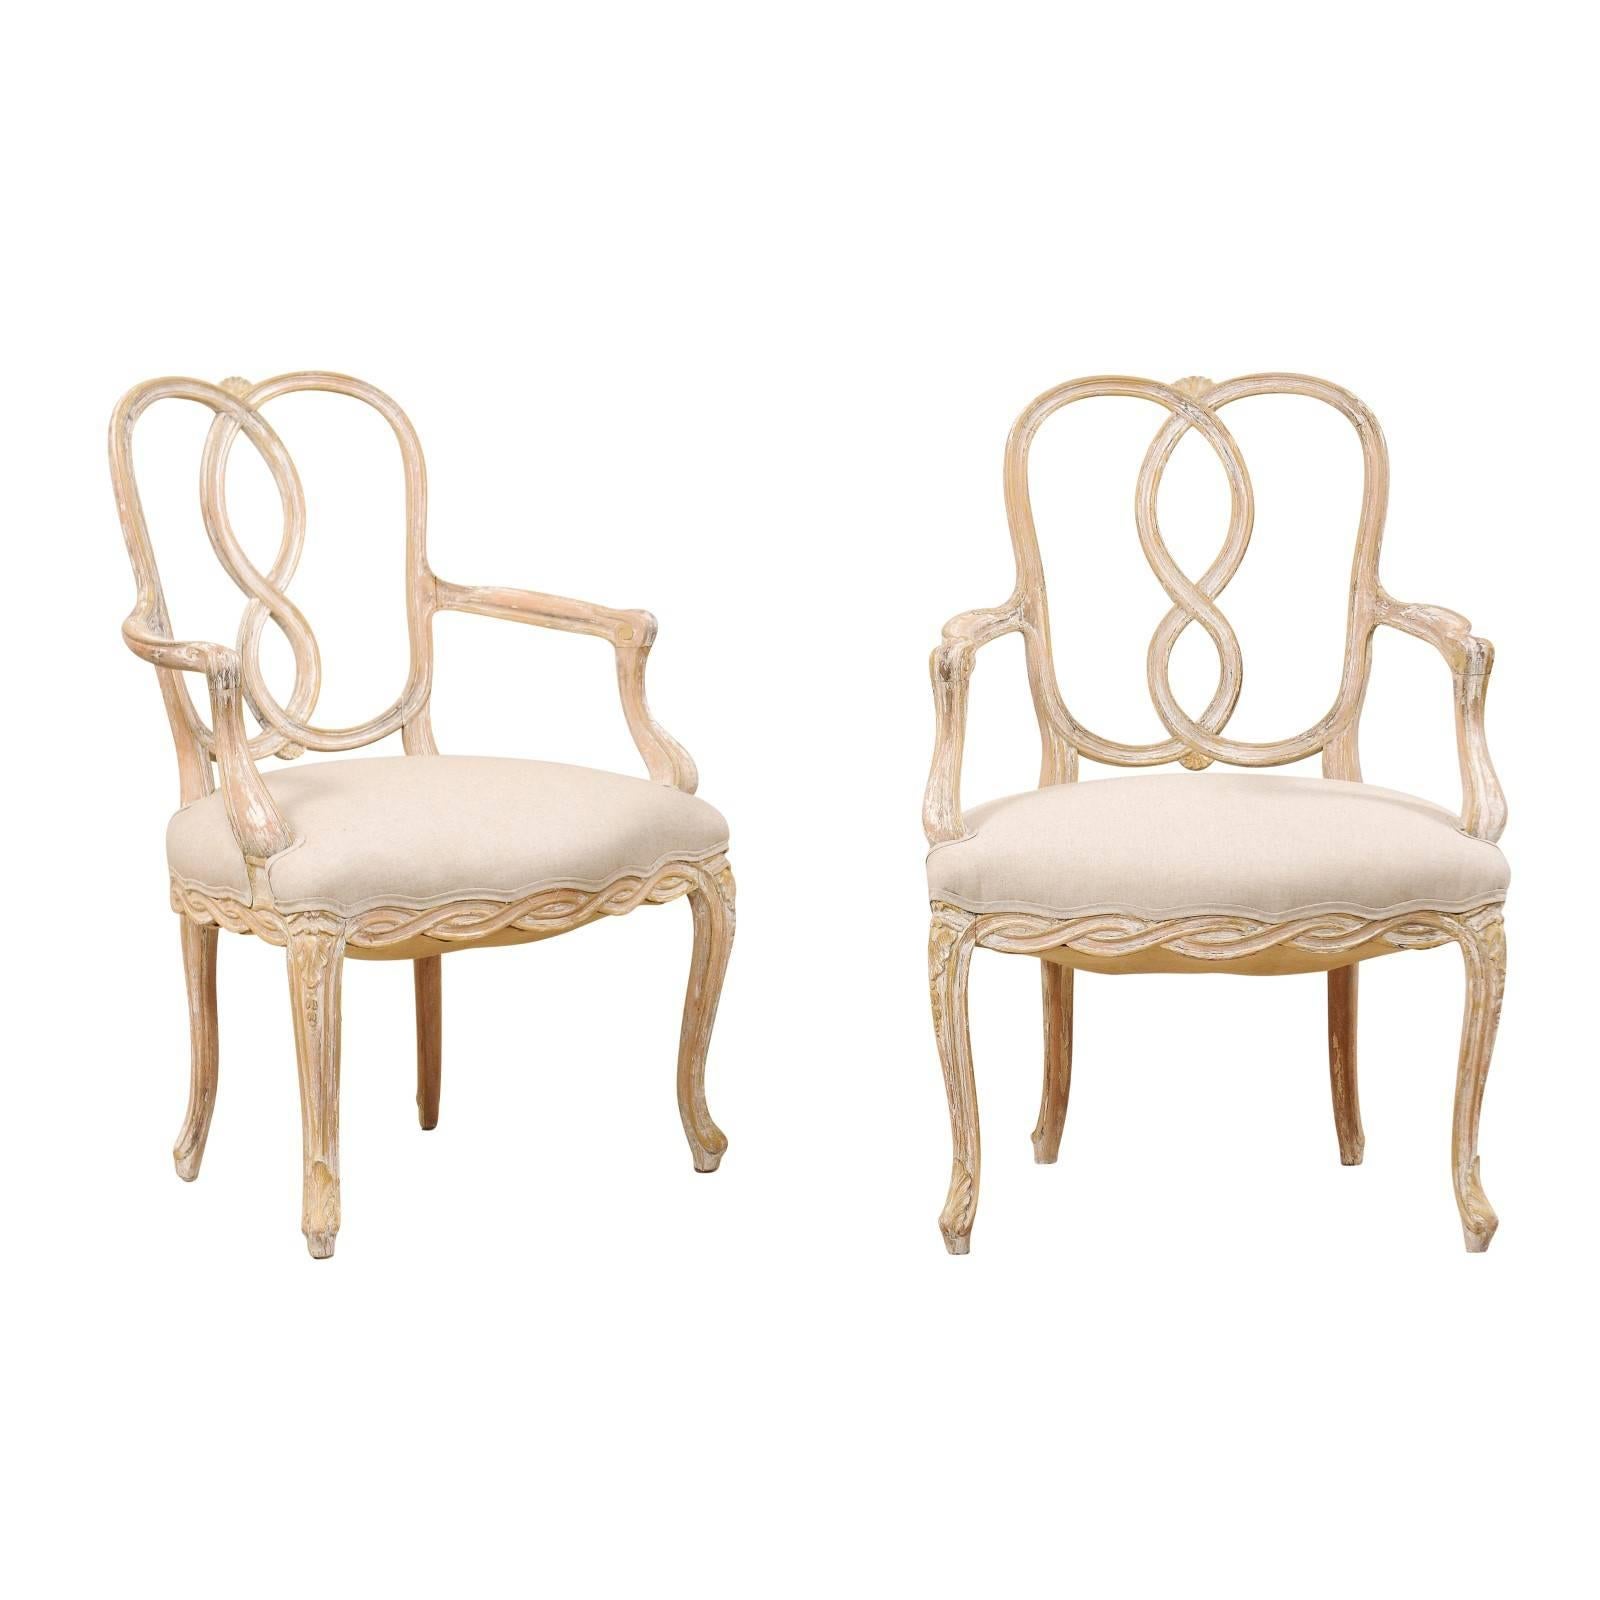 Pair of Venetian Style Ribbon Back Chairs with Cabriole Legs in Nice Light Tones